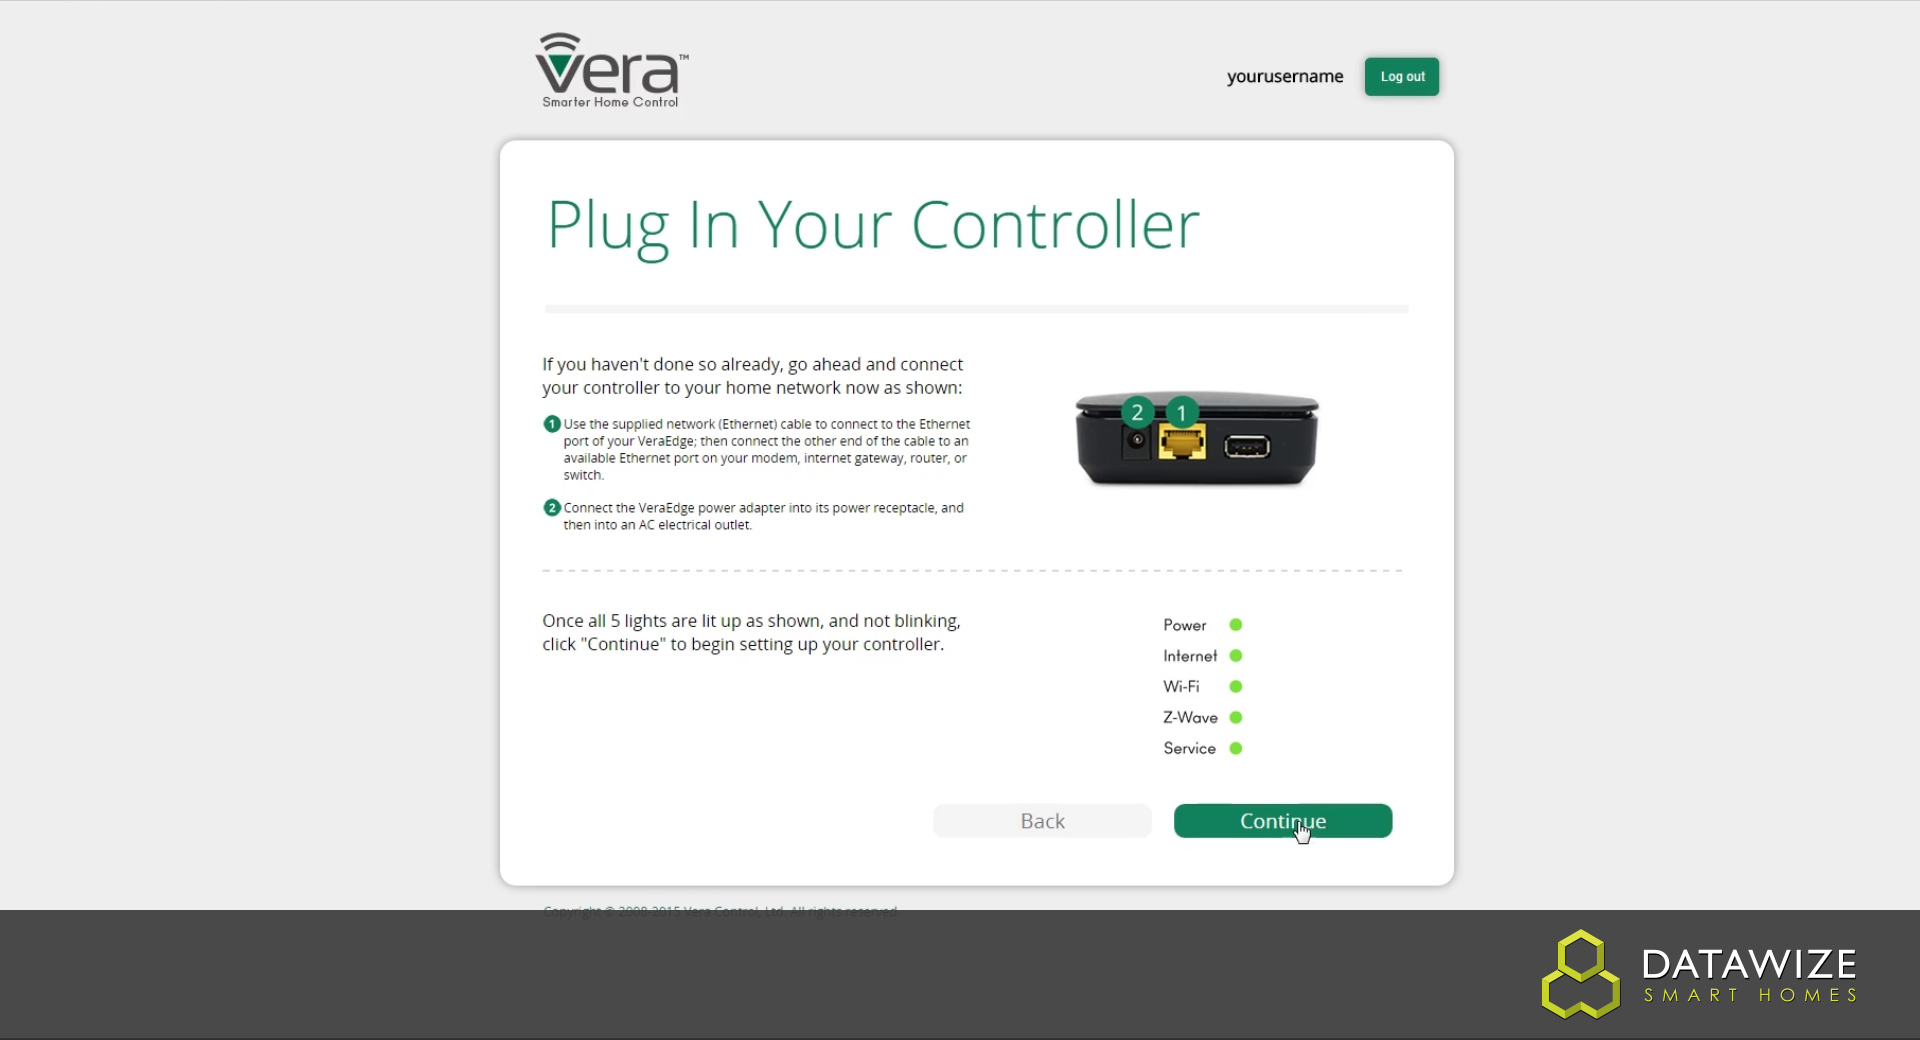 How to Setup a VeraEdge - Plug in your controller